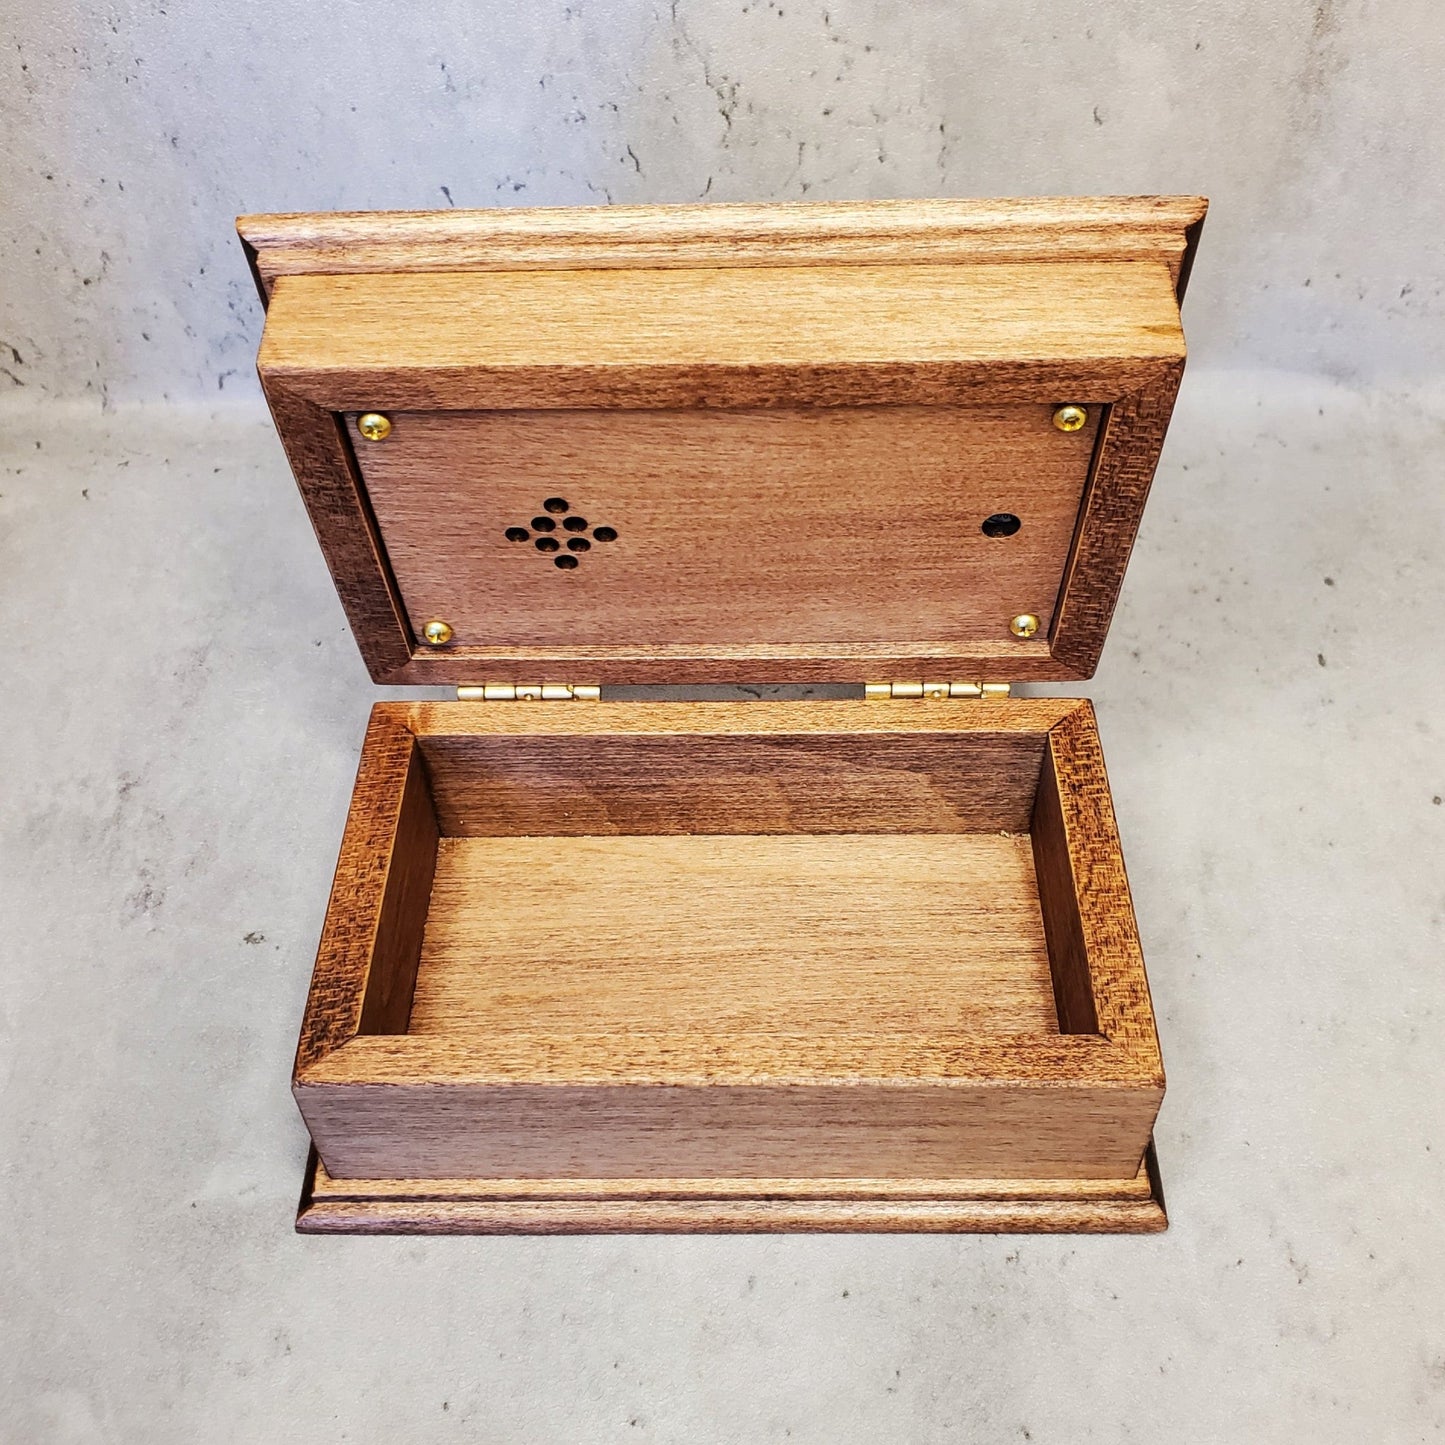 musical jewelry box by Simplycoolgifts